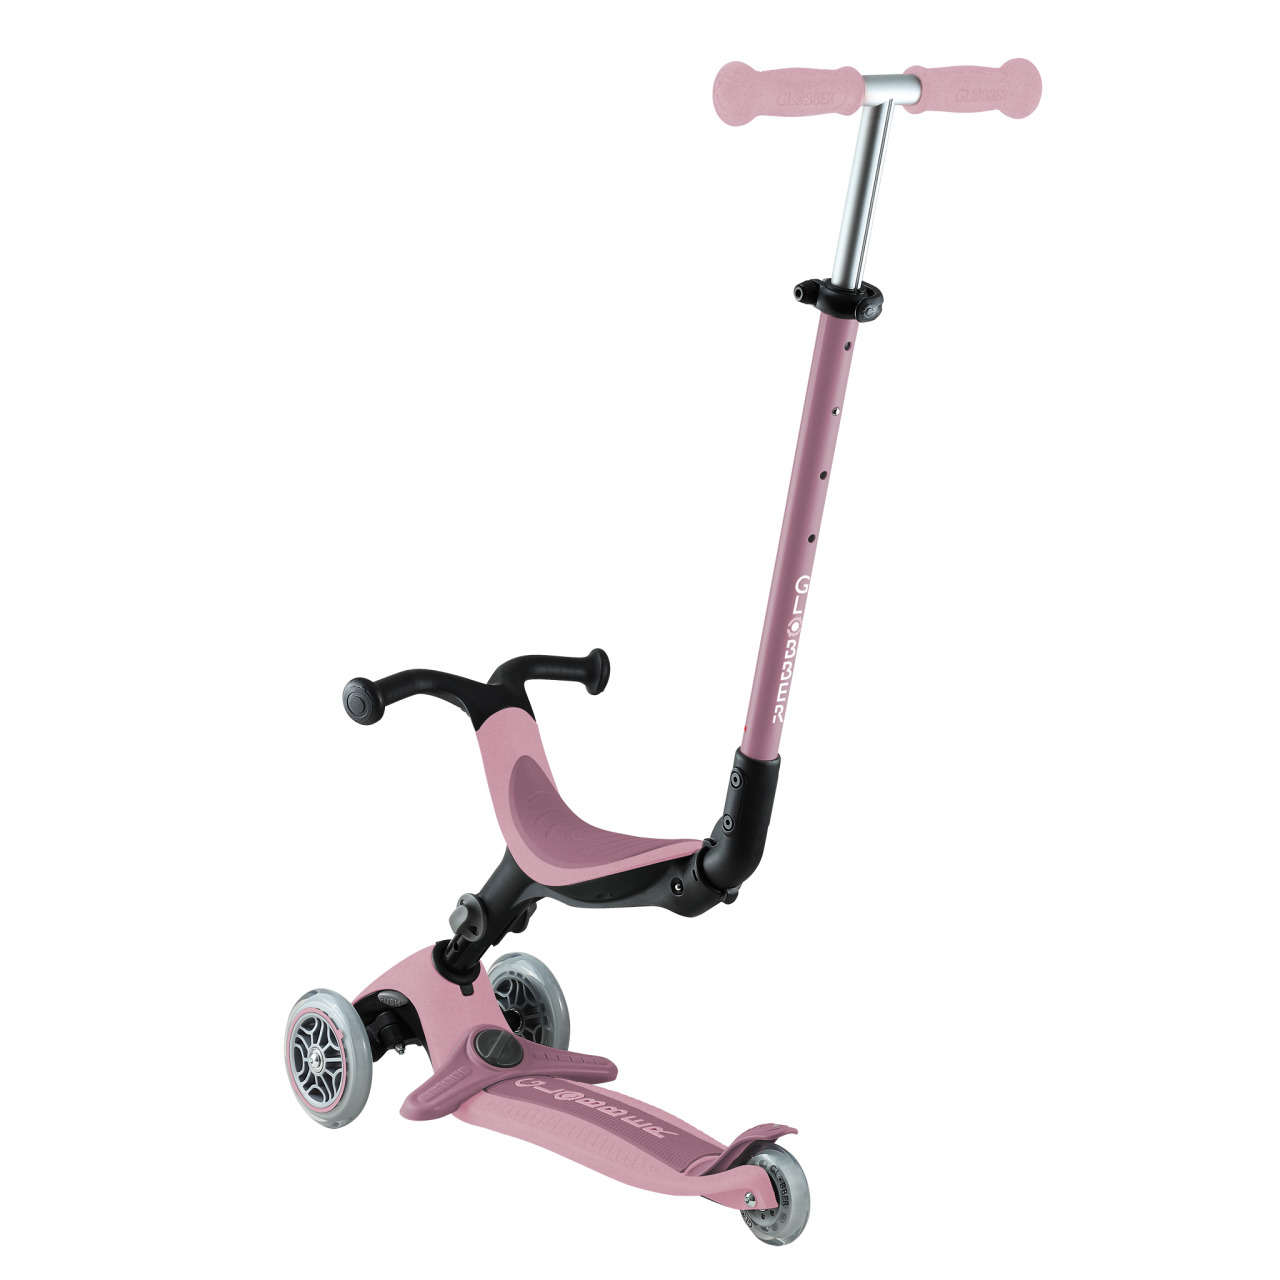 740 510 3 Wheel Eco Scooter With Seat